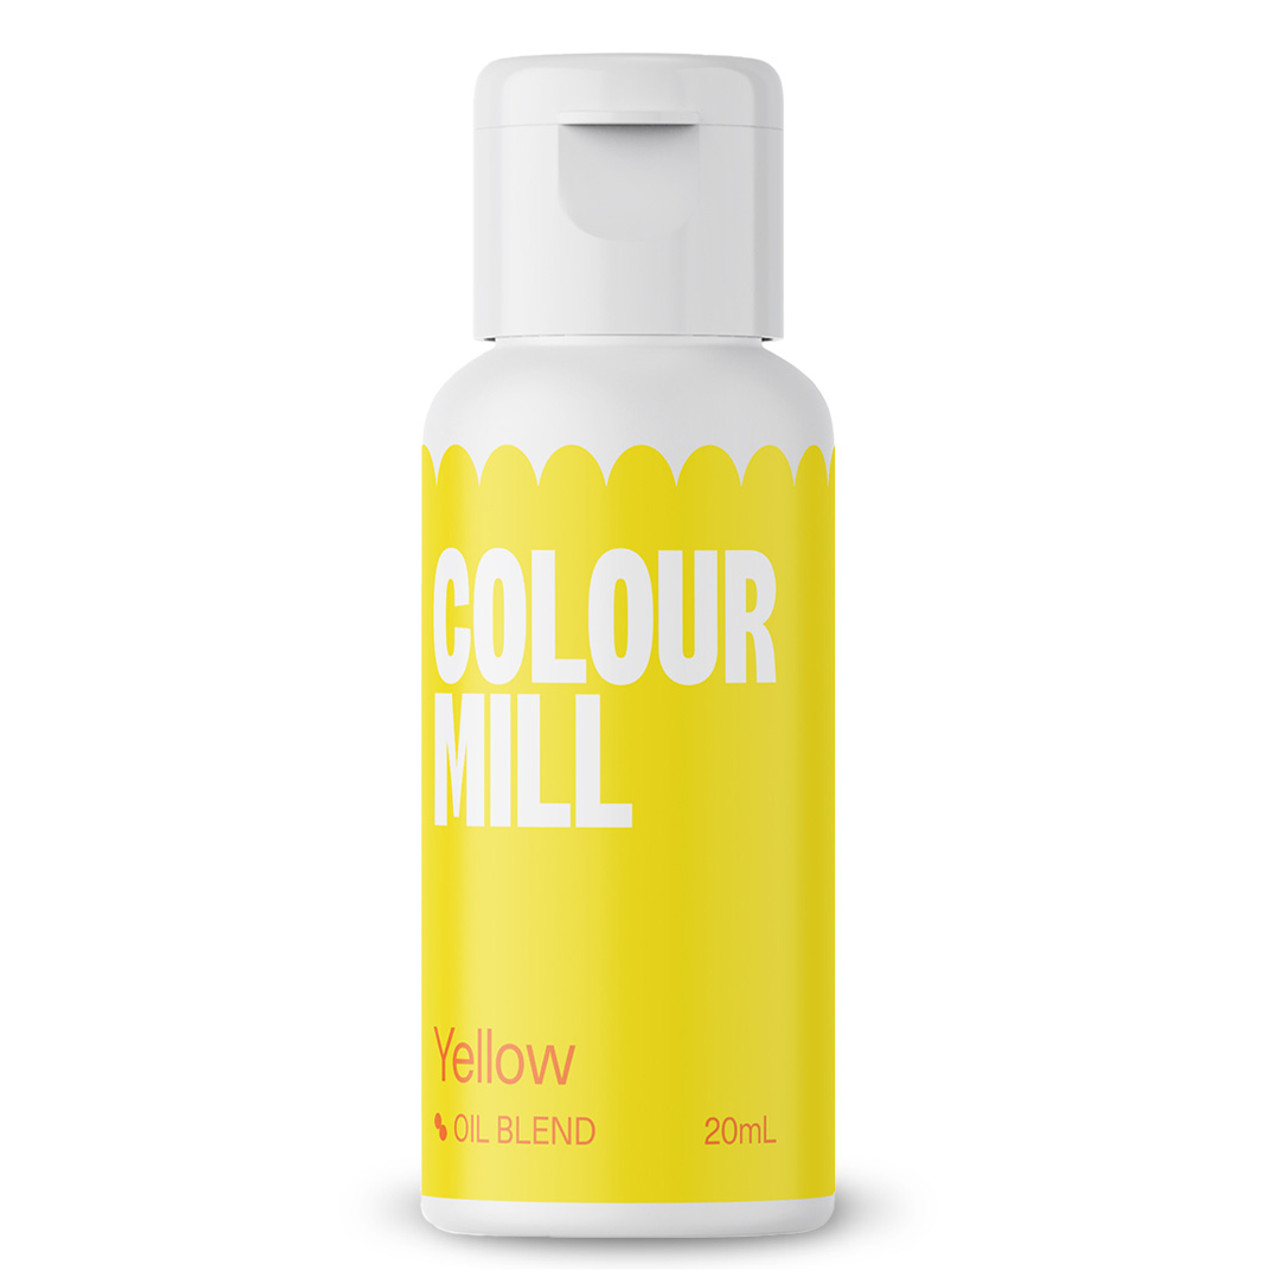 Colour Mill - Oil Based Colour - Yellow 20ml